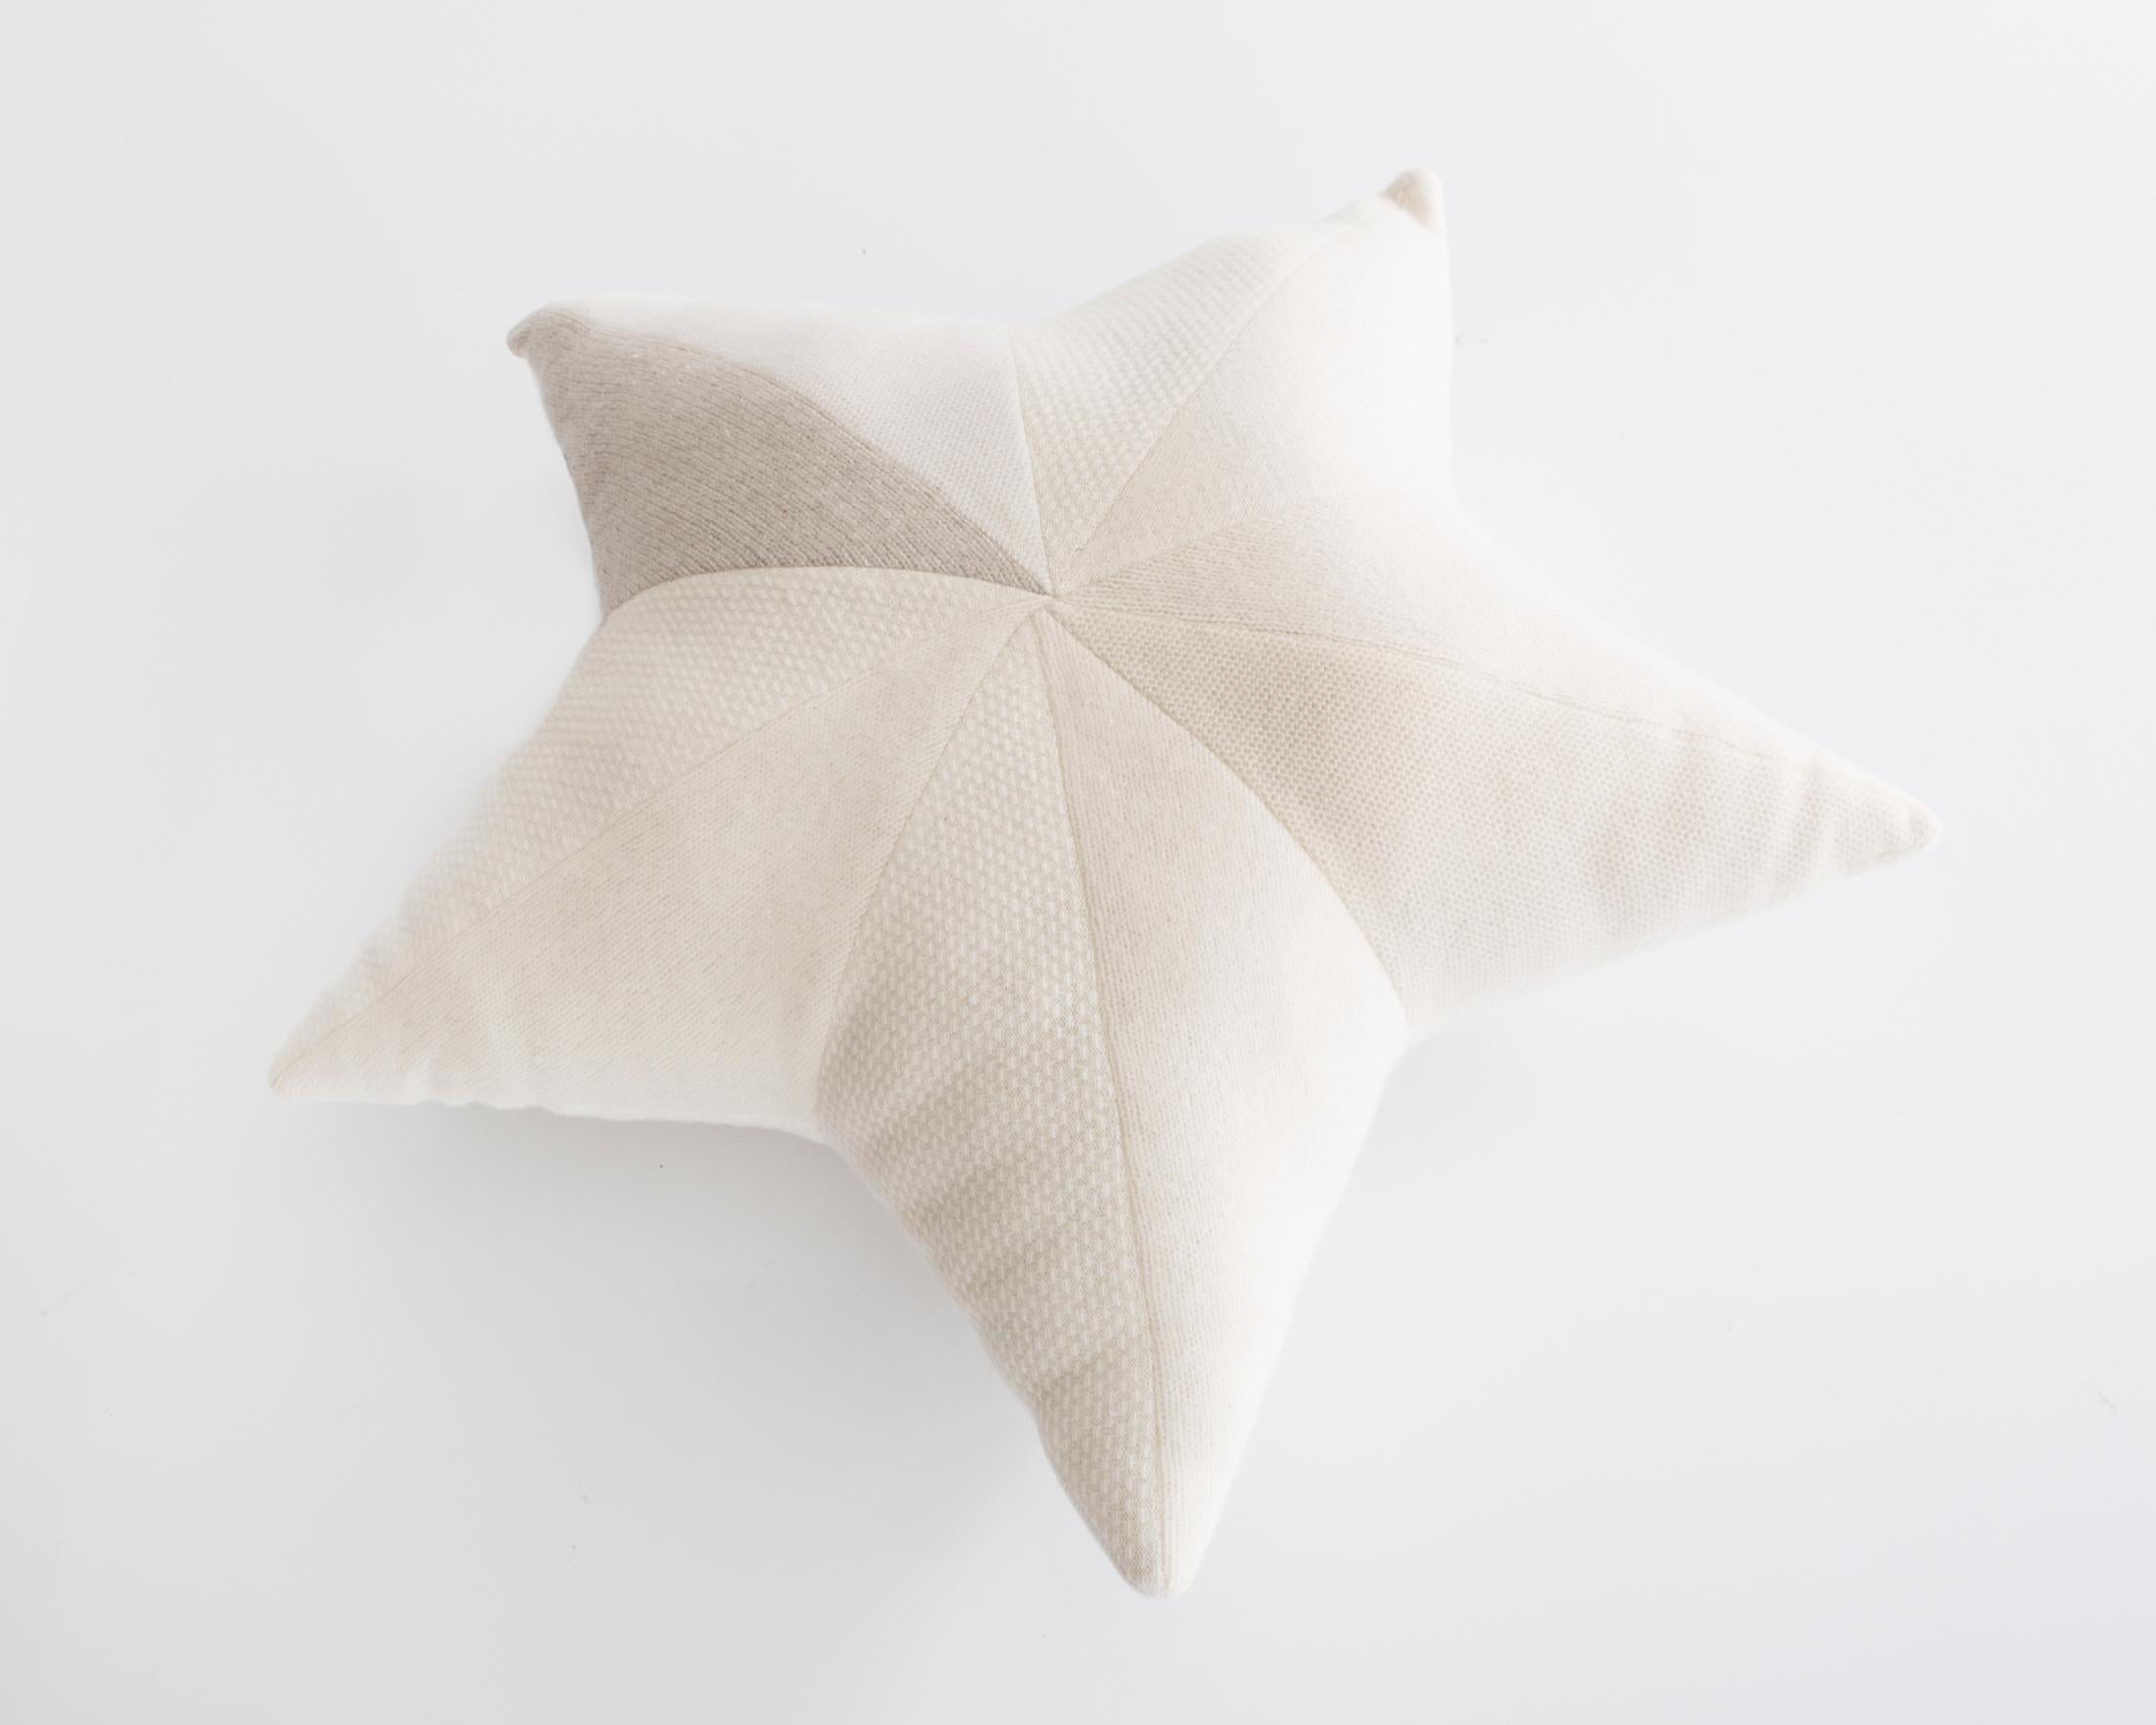 American Star-Shaped Patchwordk Pillow in White Cashmere by Greg Chait, 2017